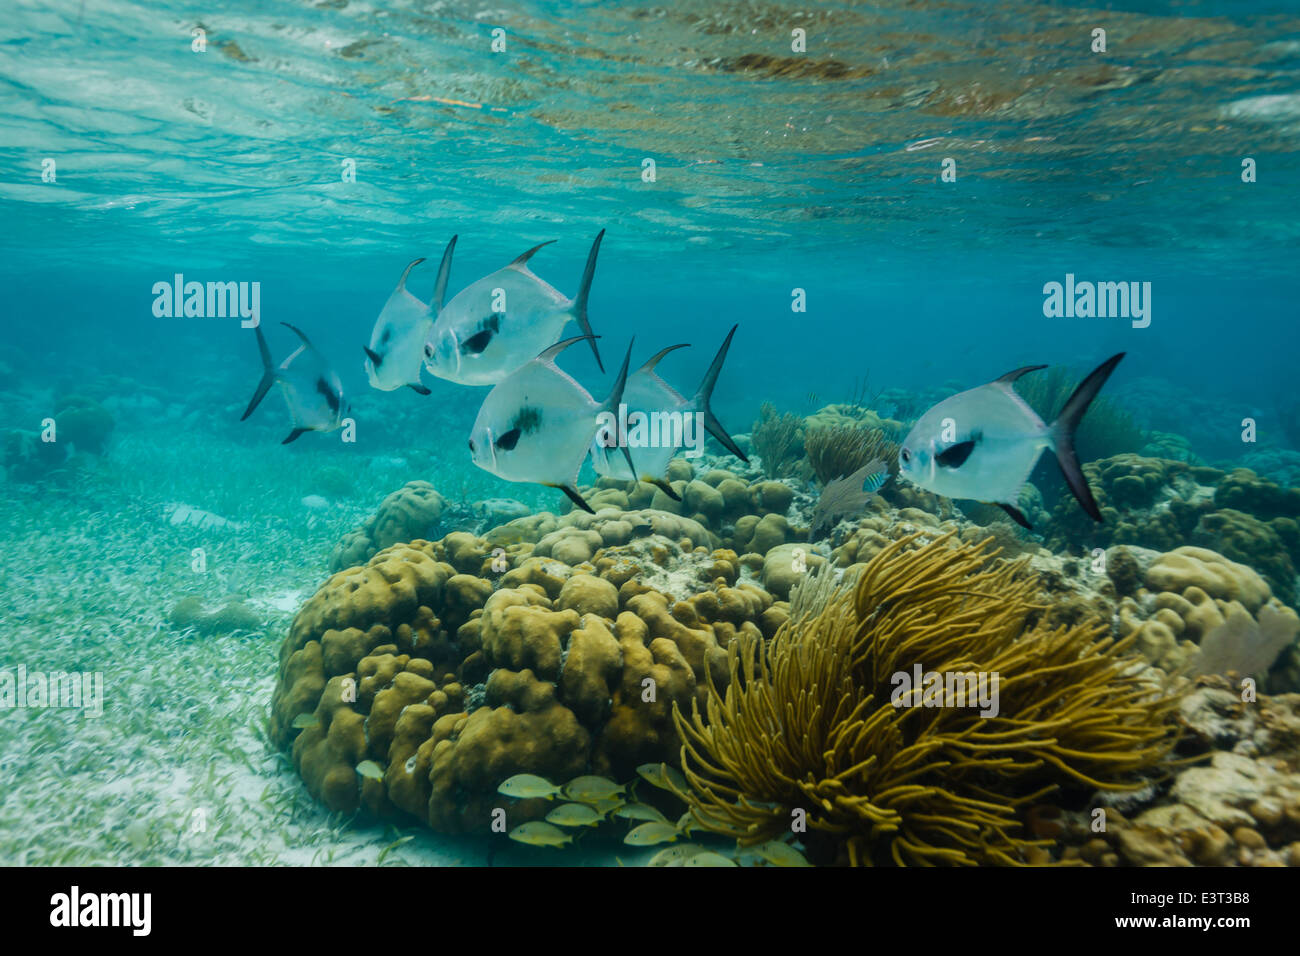 Two schools of different big white and black and small yellow fish swim above and below coral formation on reef Stock Photo